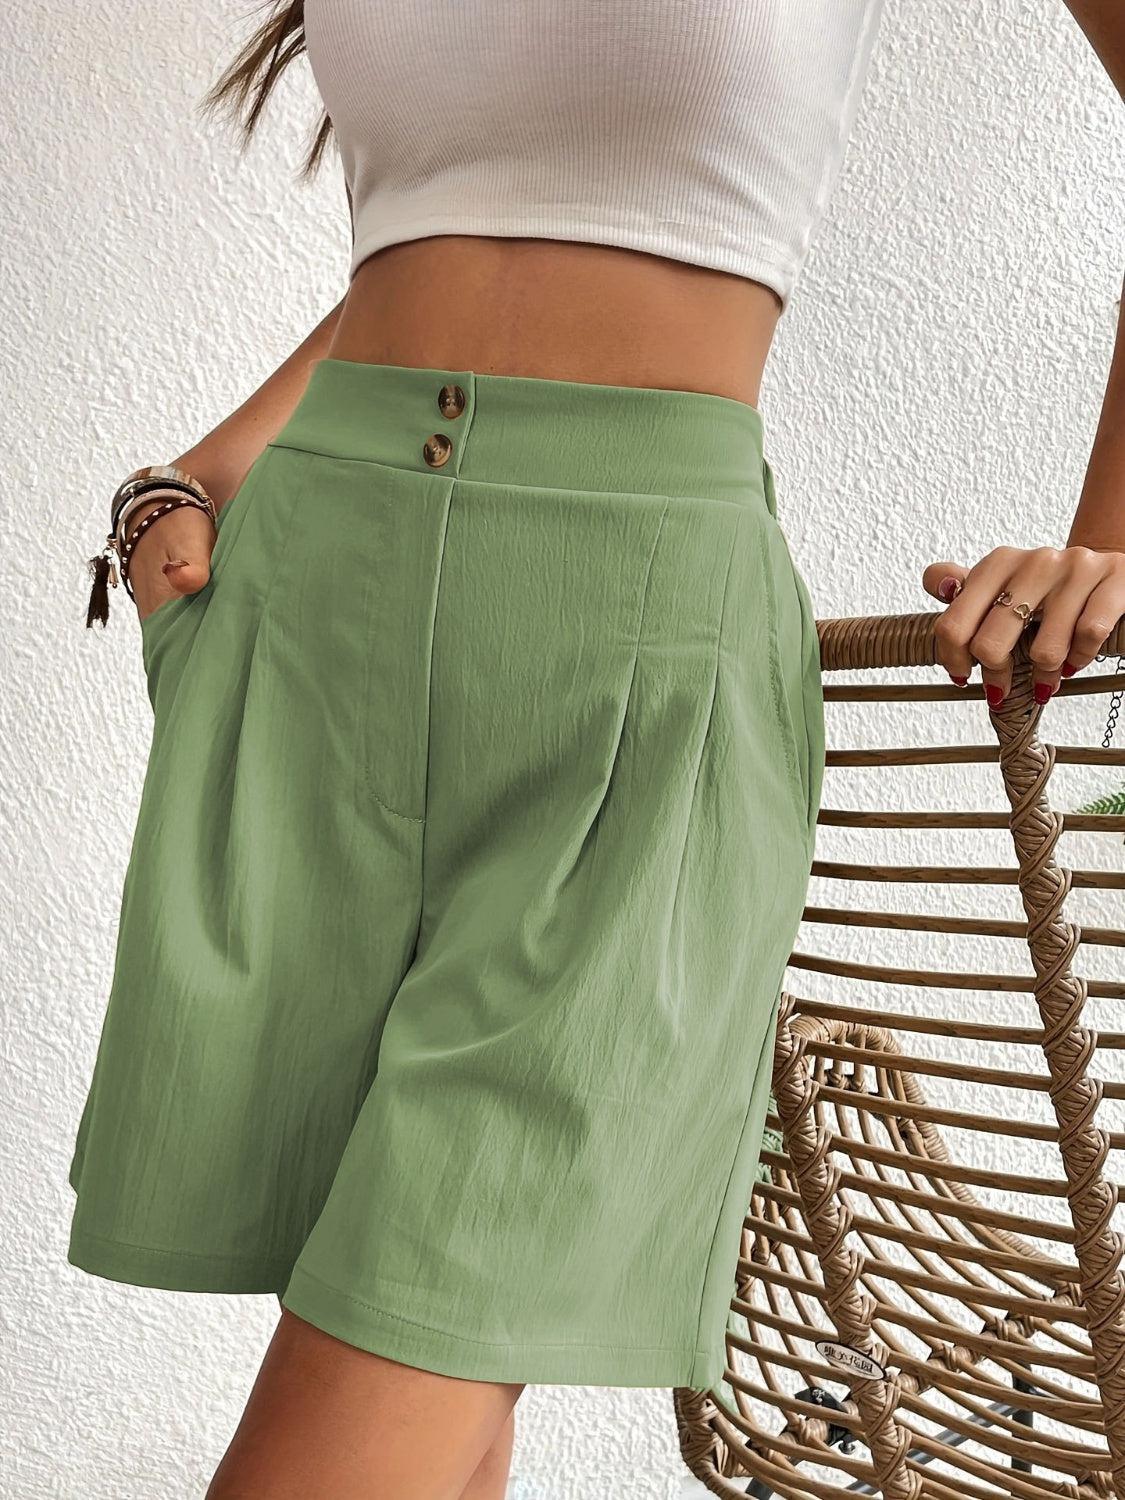 a woman in a white top and green shorts